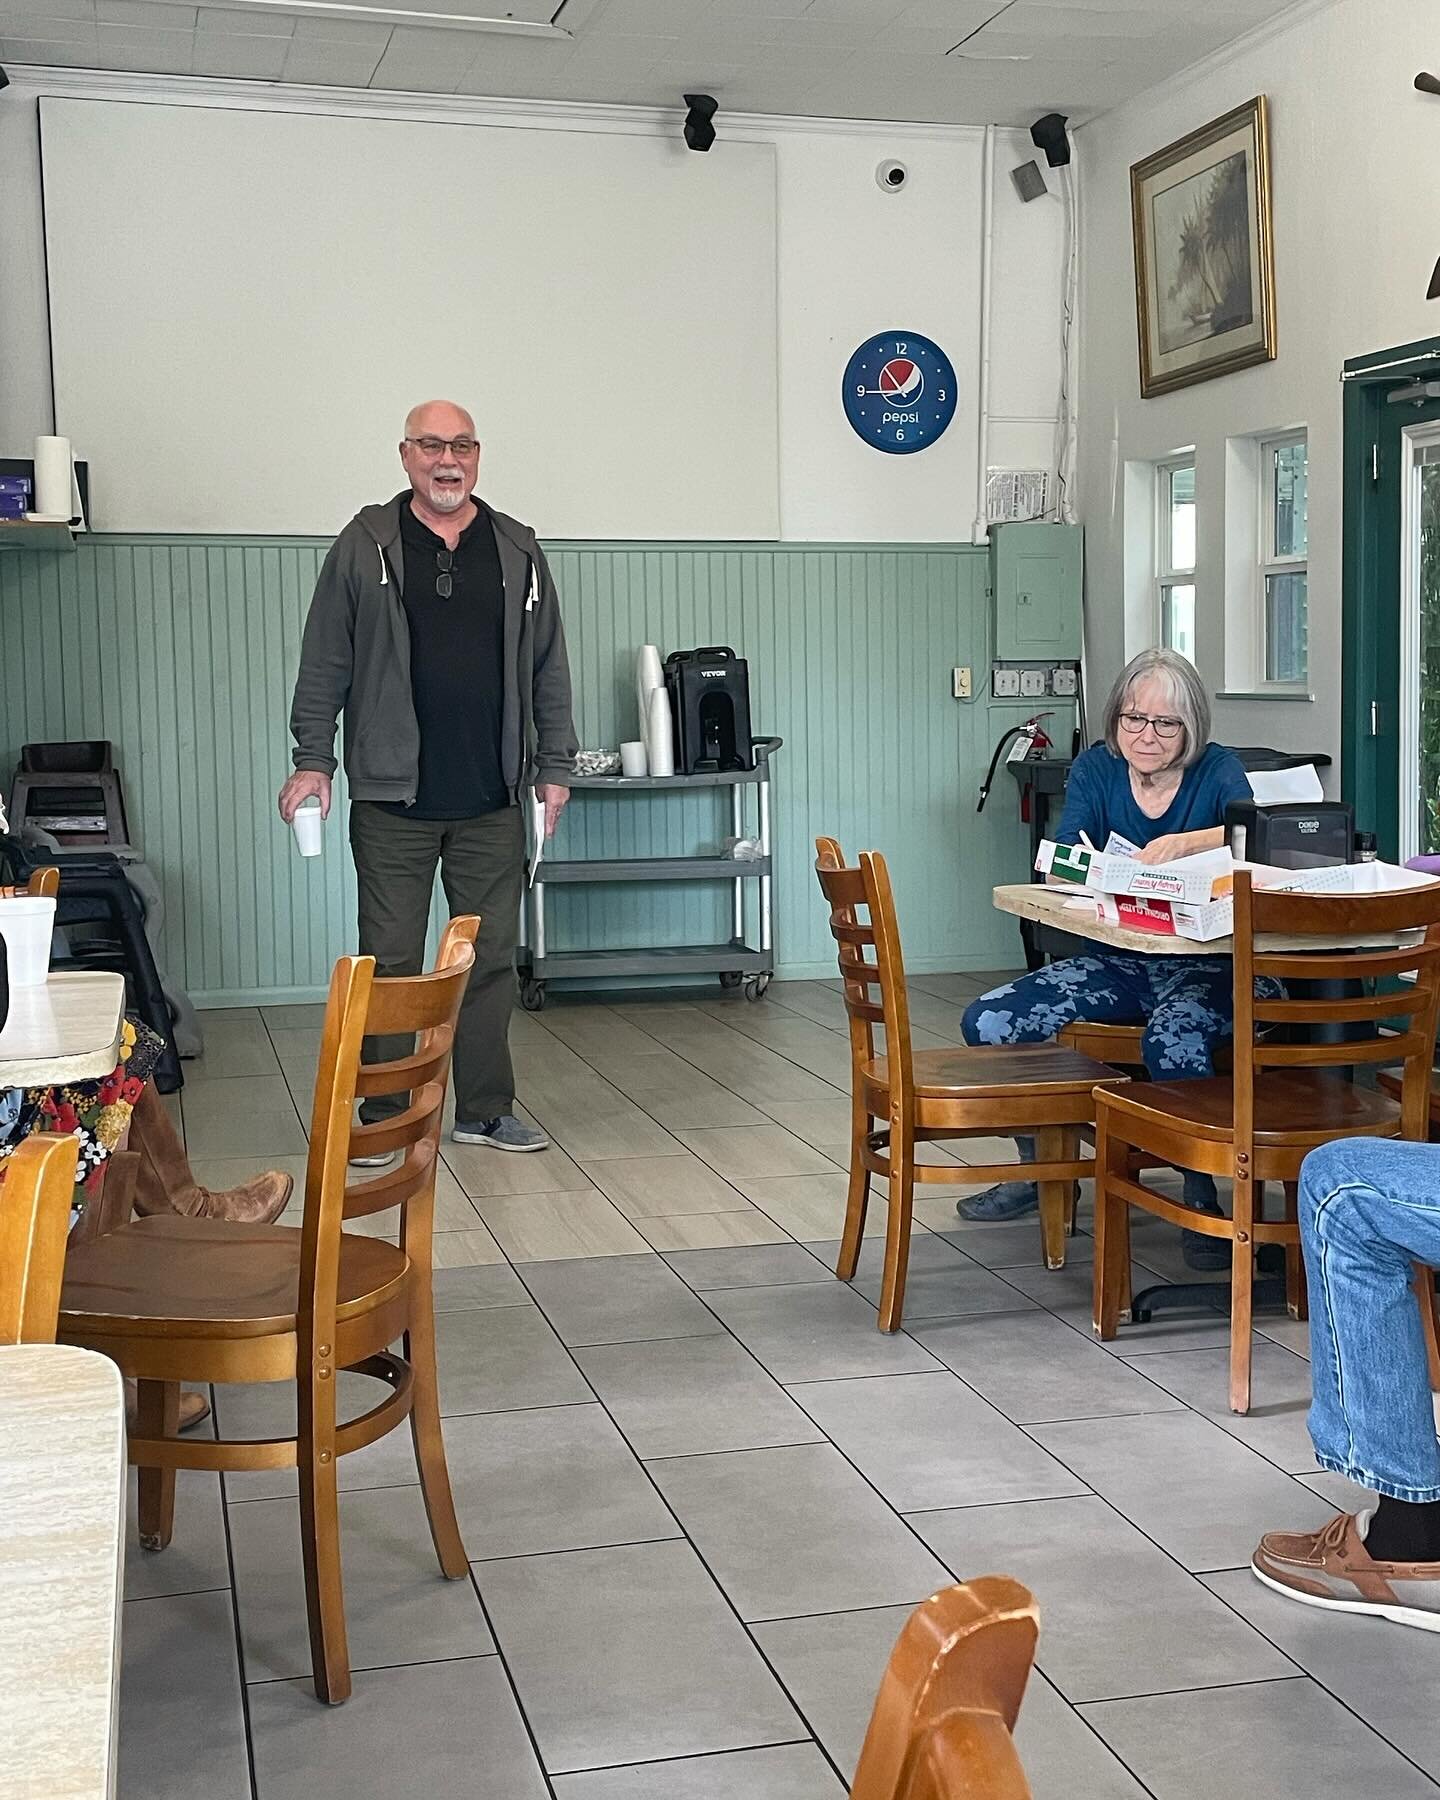 Williams Borden is a neighborhood in the western portion of District 2.  They have a very active group, with speakers from around the city at their meetings. This month Brian Maxwell, City Manager, provided updates on 37th street construction and ans